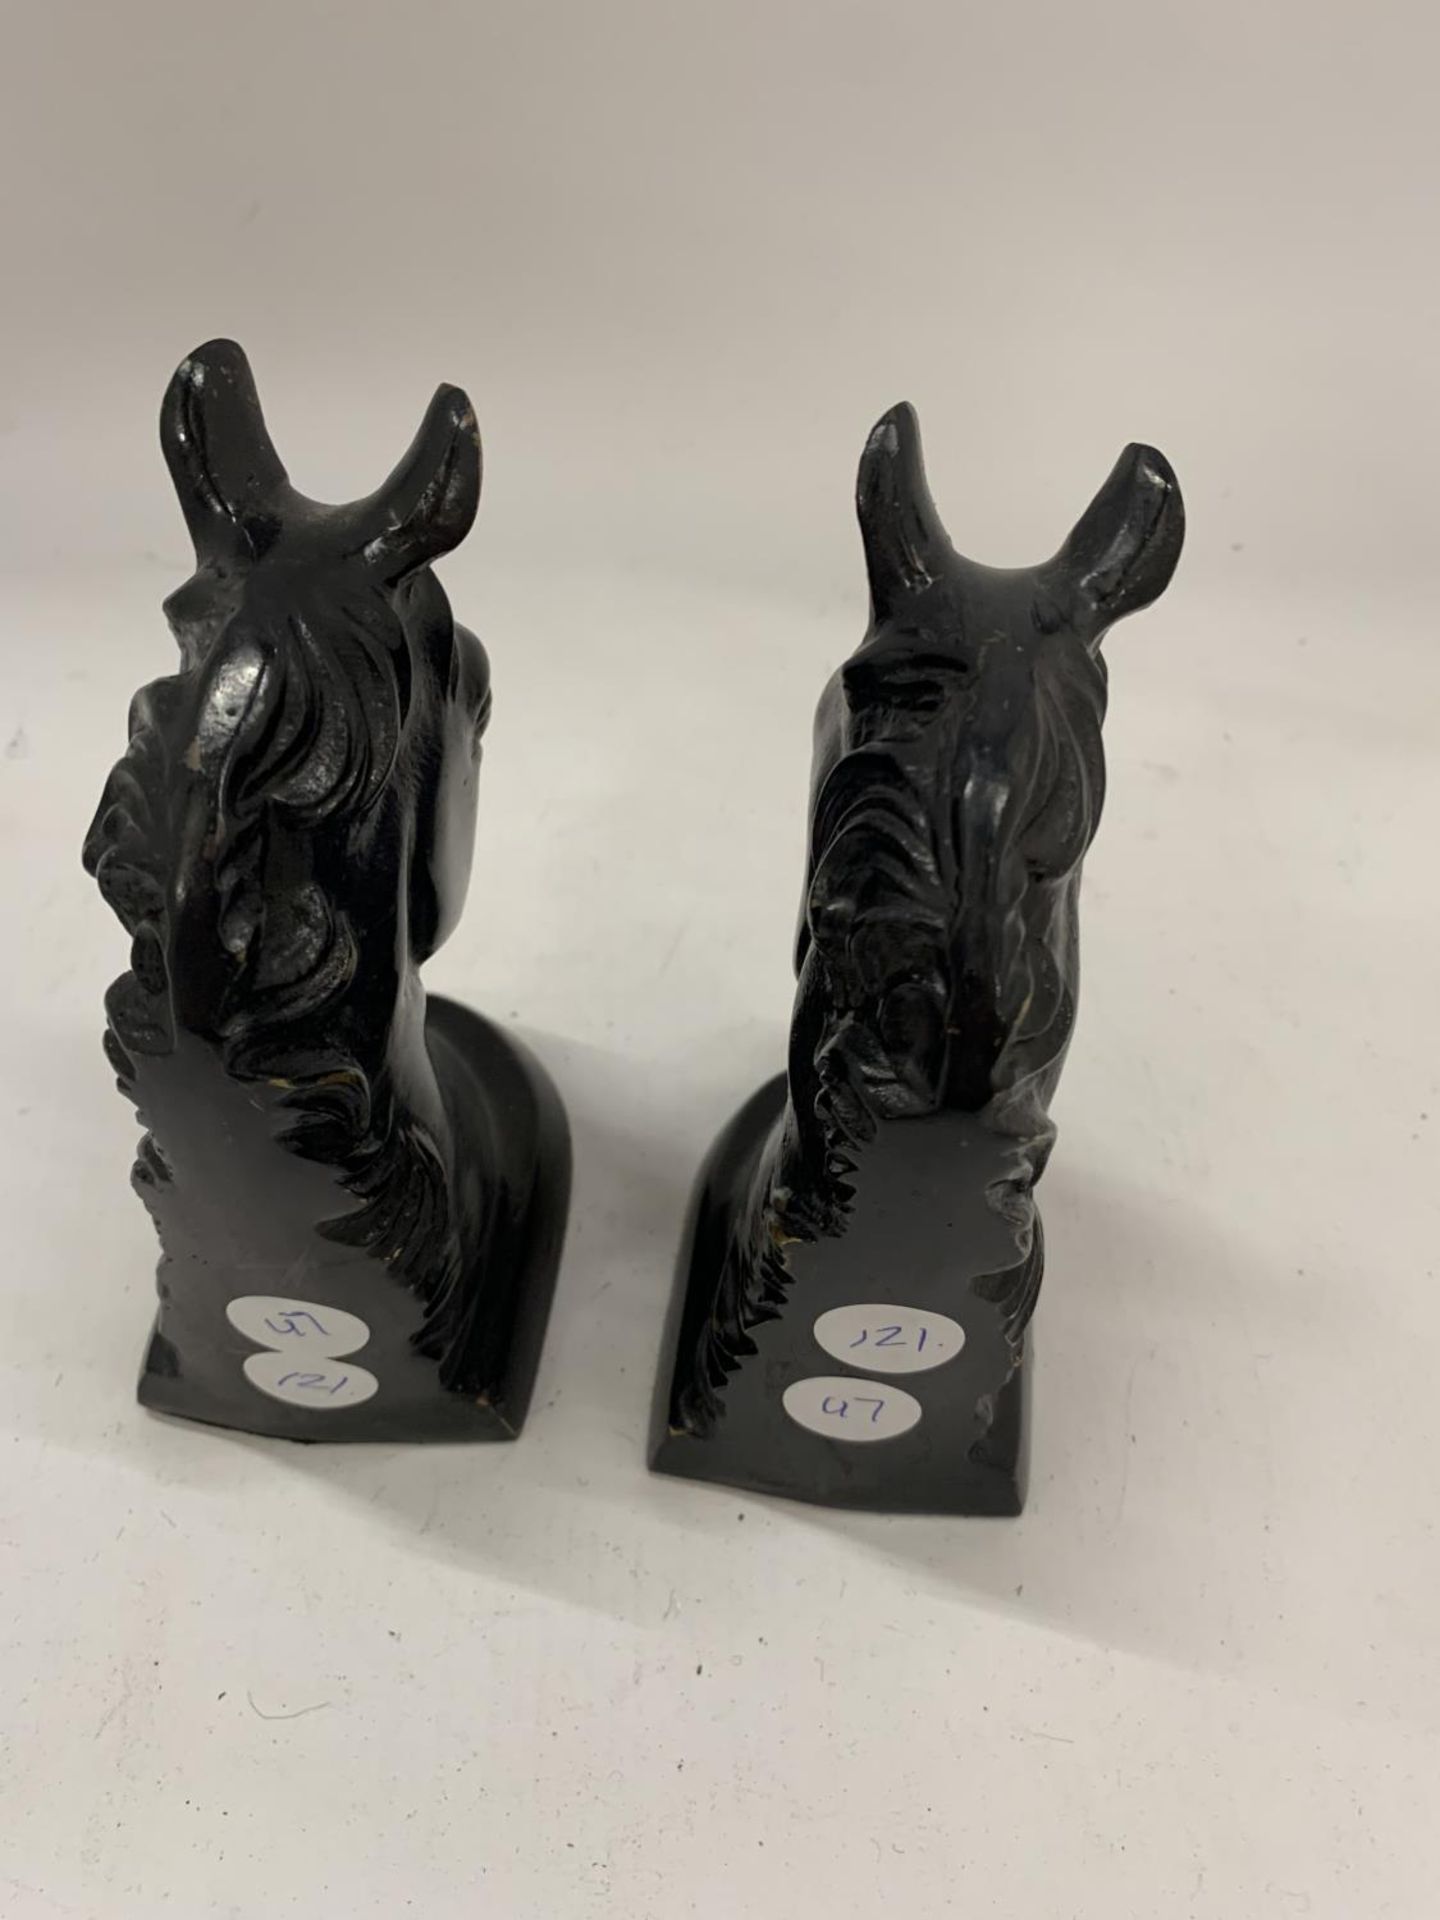 A PAIR OF STONE BLACK HORSES HEAD BOOK-ENDS HEIGHT 14CM - Image 6 of 8